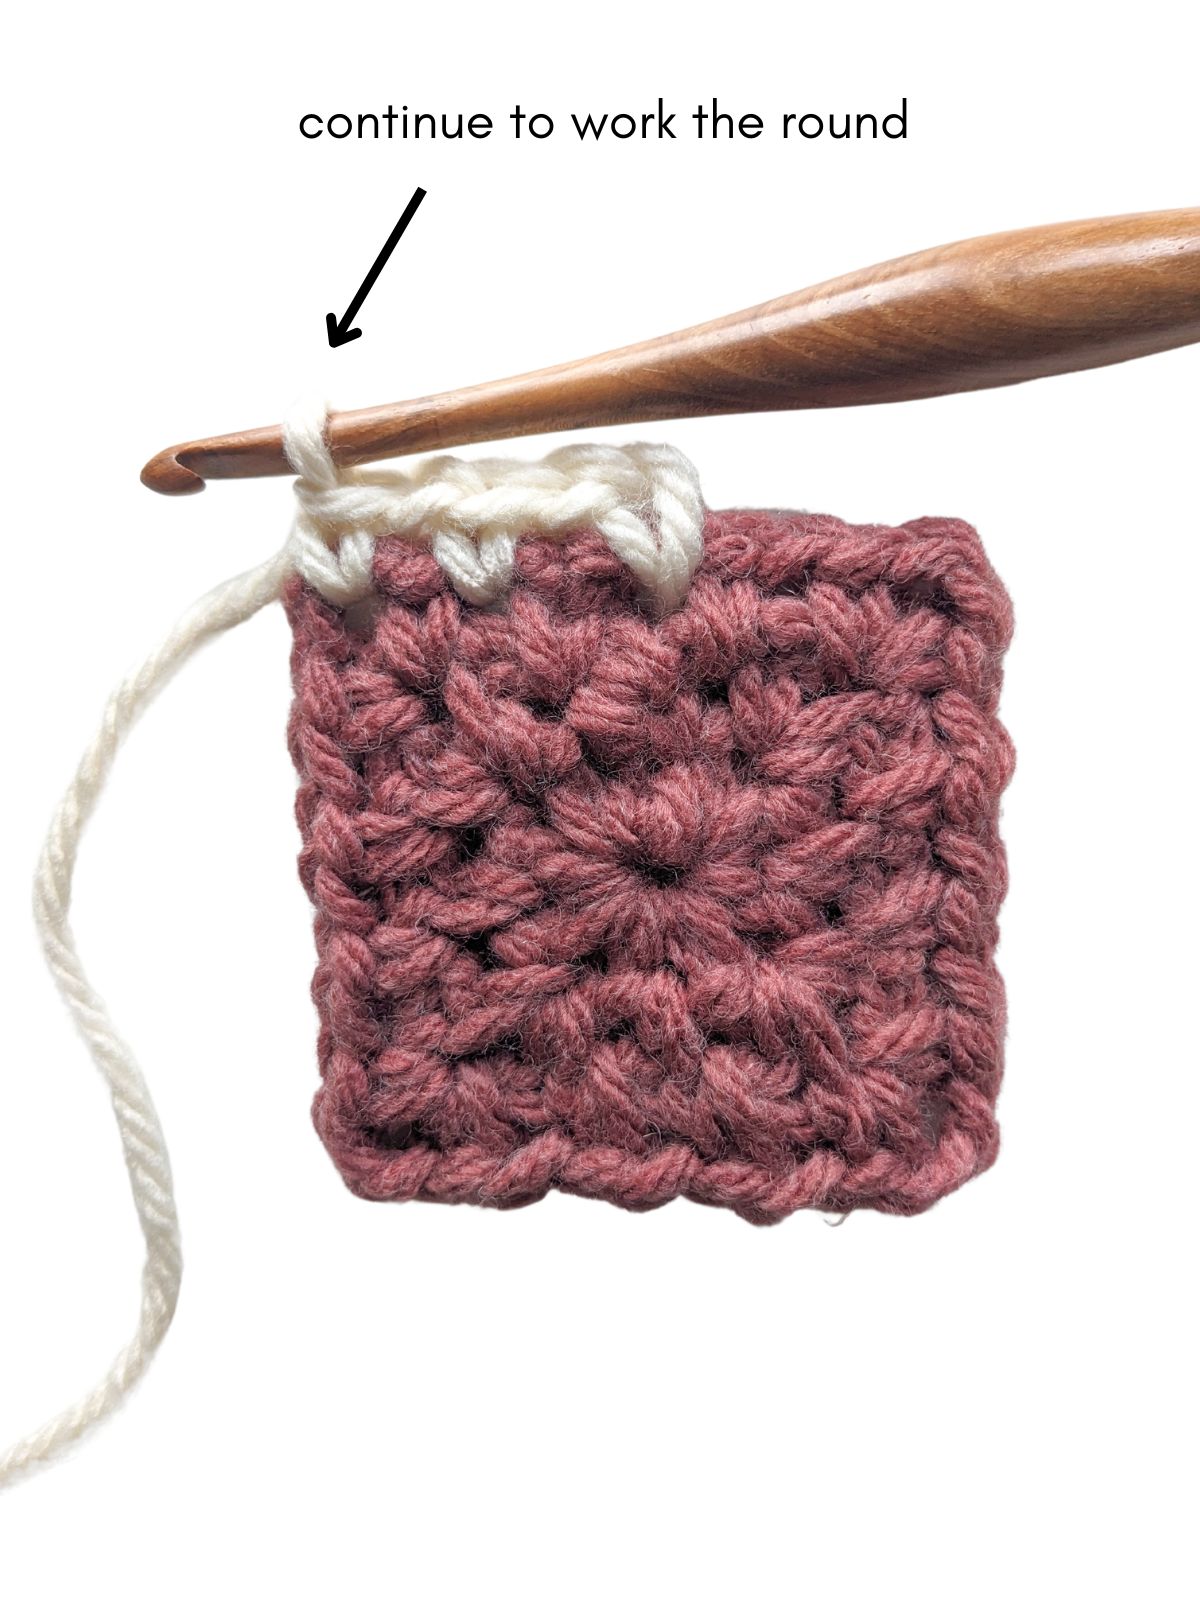 A moss stitch square with a new color of yarn being added. 